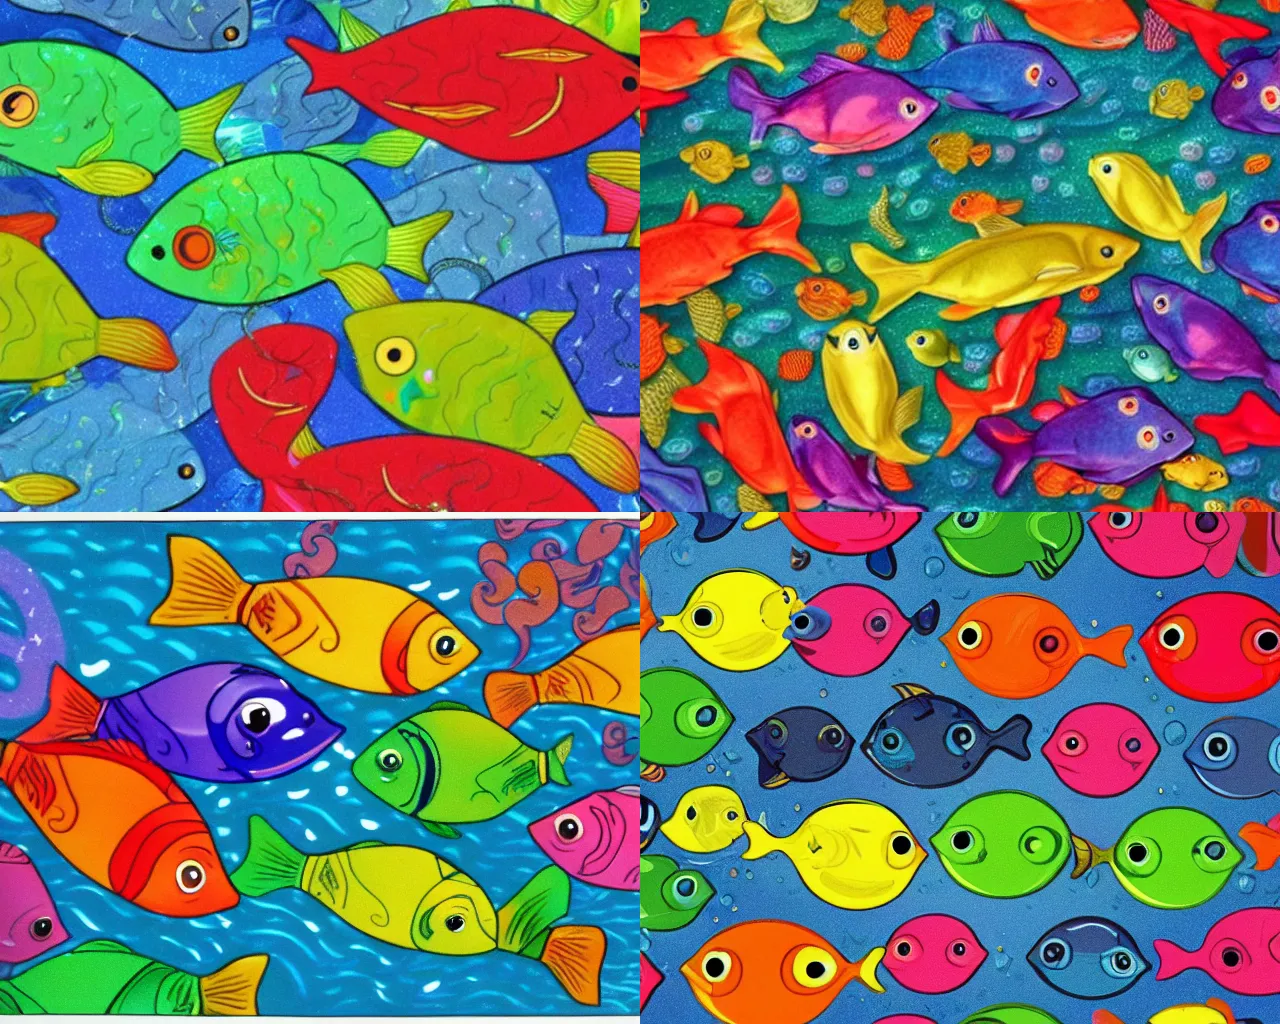 Prompt: rainbow-colored shiny fishes, fishes with friendly faces, fishes are swimming in the ocean